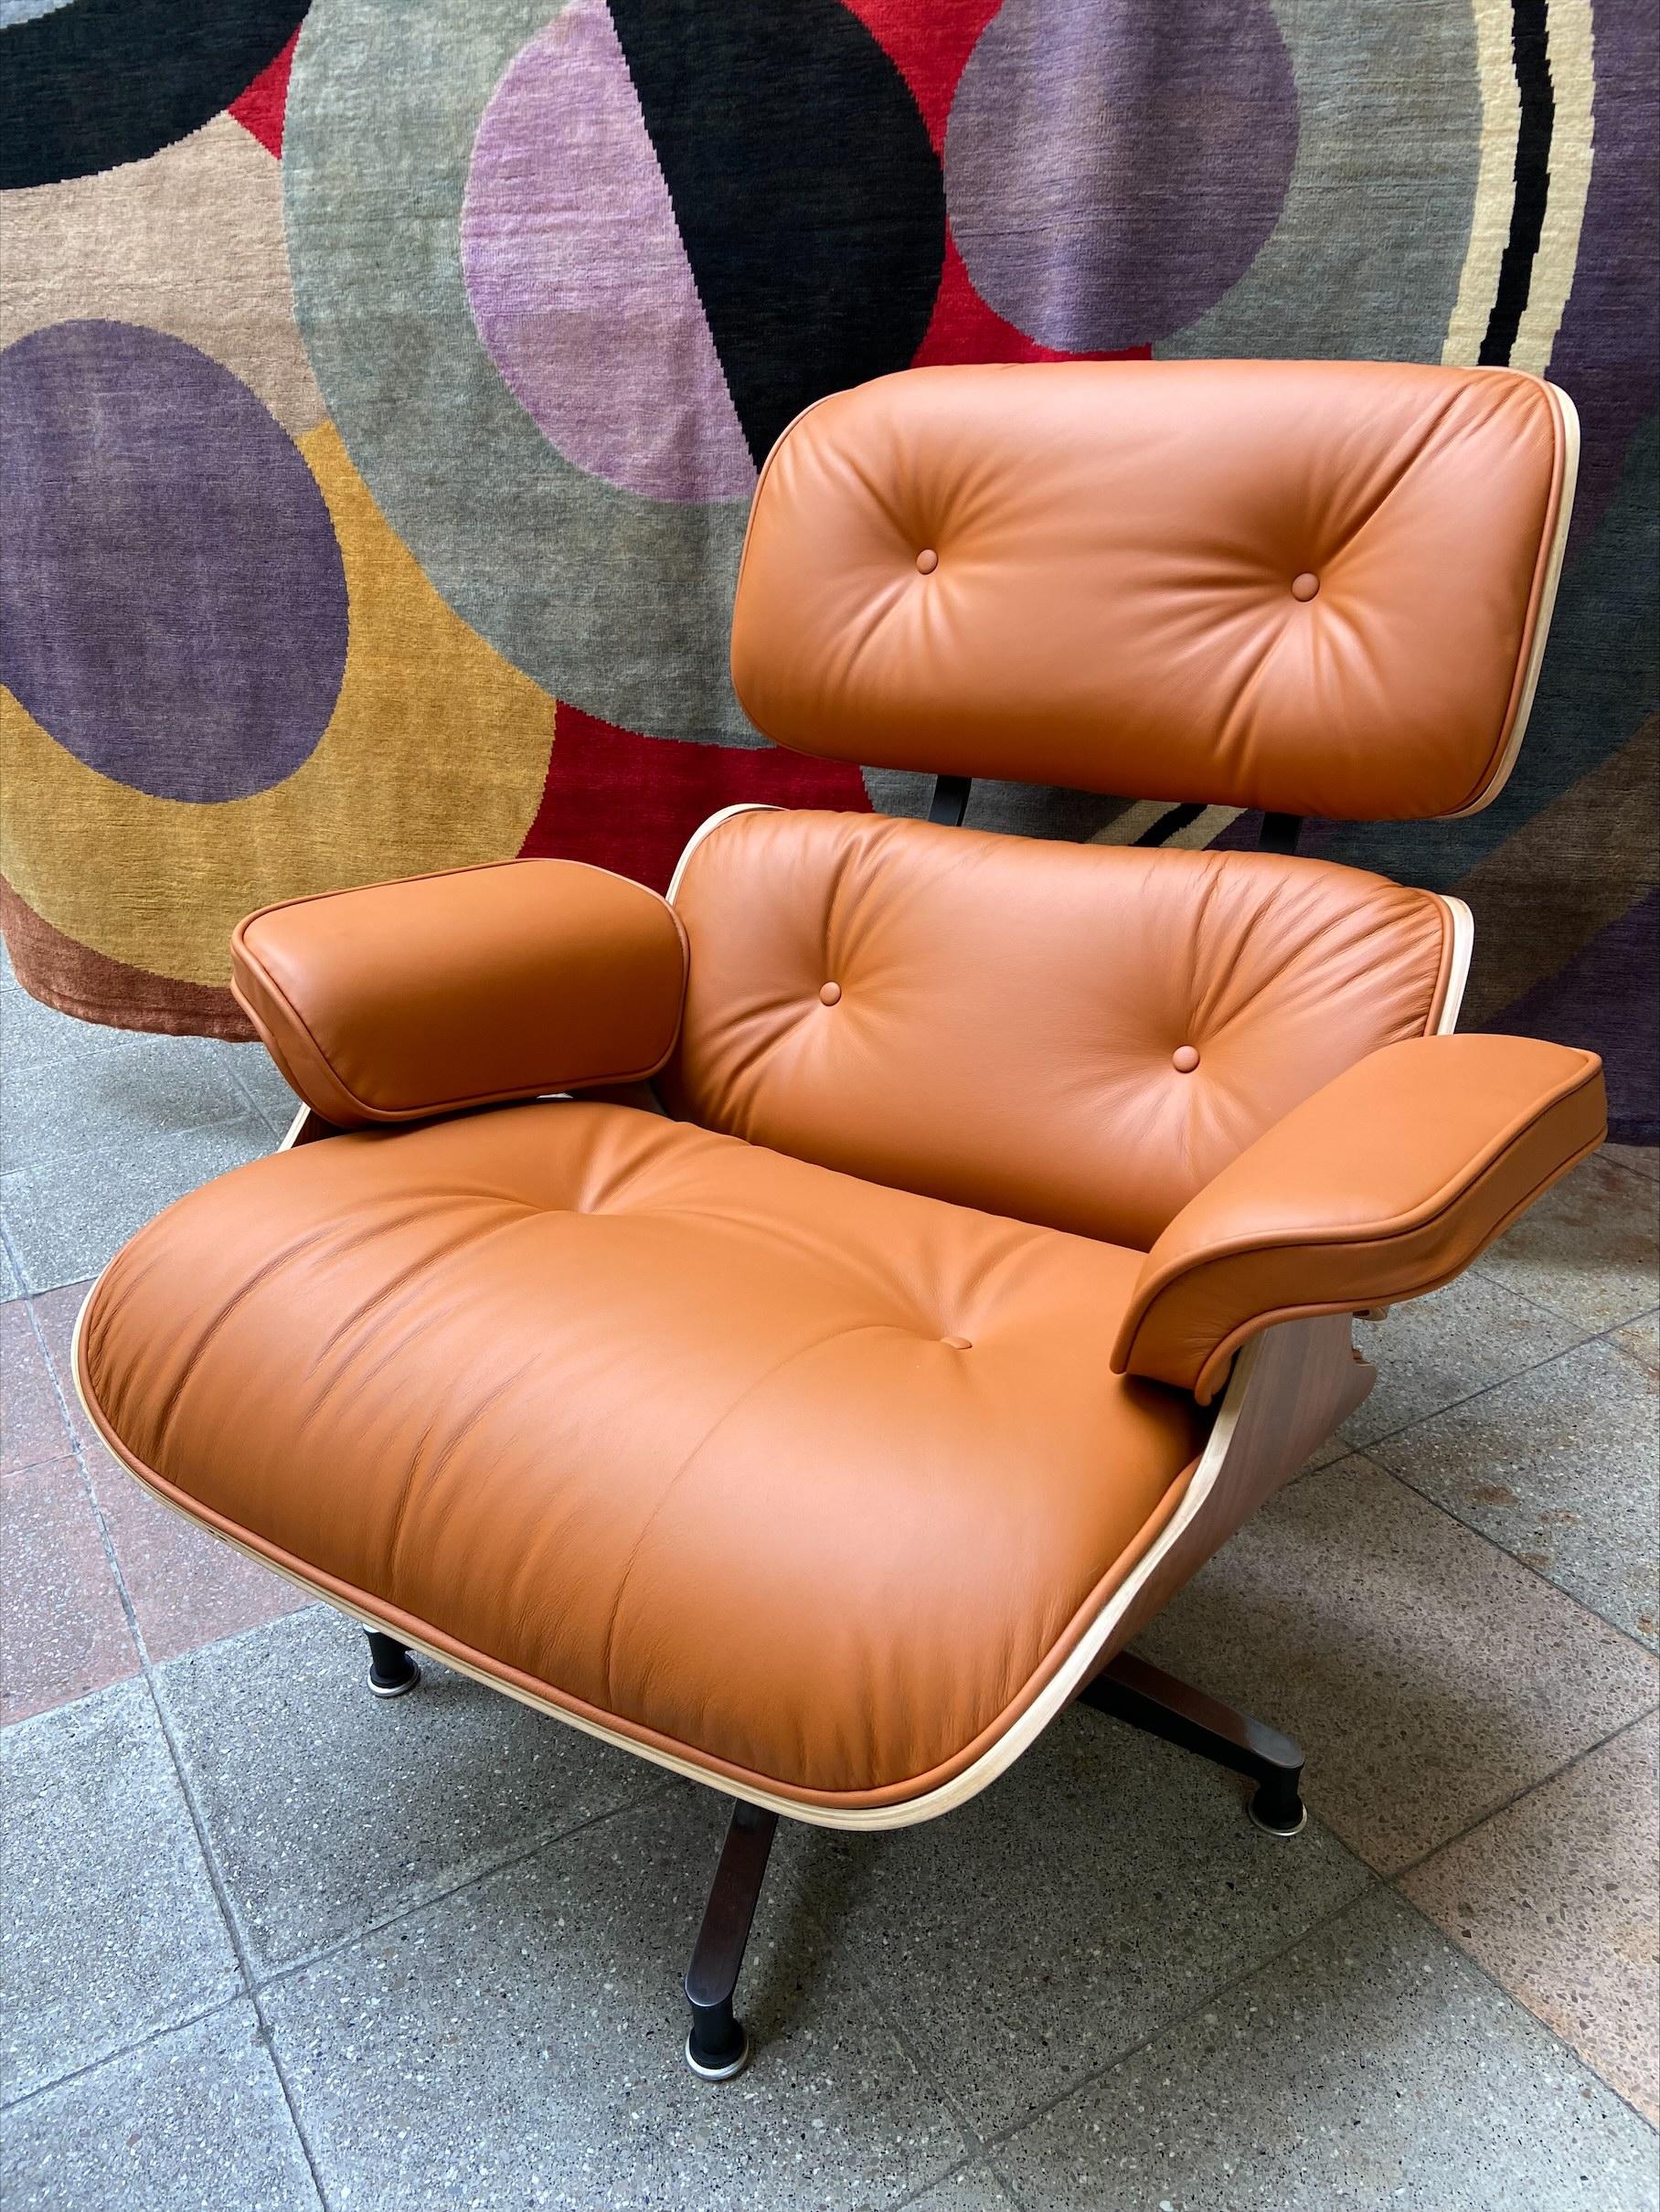 Charles Eames - Lounge chair - cognac leather and rosewood ottoman - circa 2011
Edition Herman Miller USA 

Cognac leather and rosewood

Dimensions:
Chair: H82 x Width. 83 x long. 83
Ottoman: 44 x 54 x 66
In a perfect state.